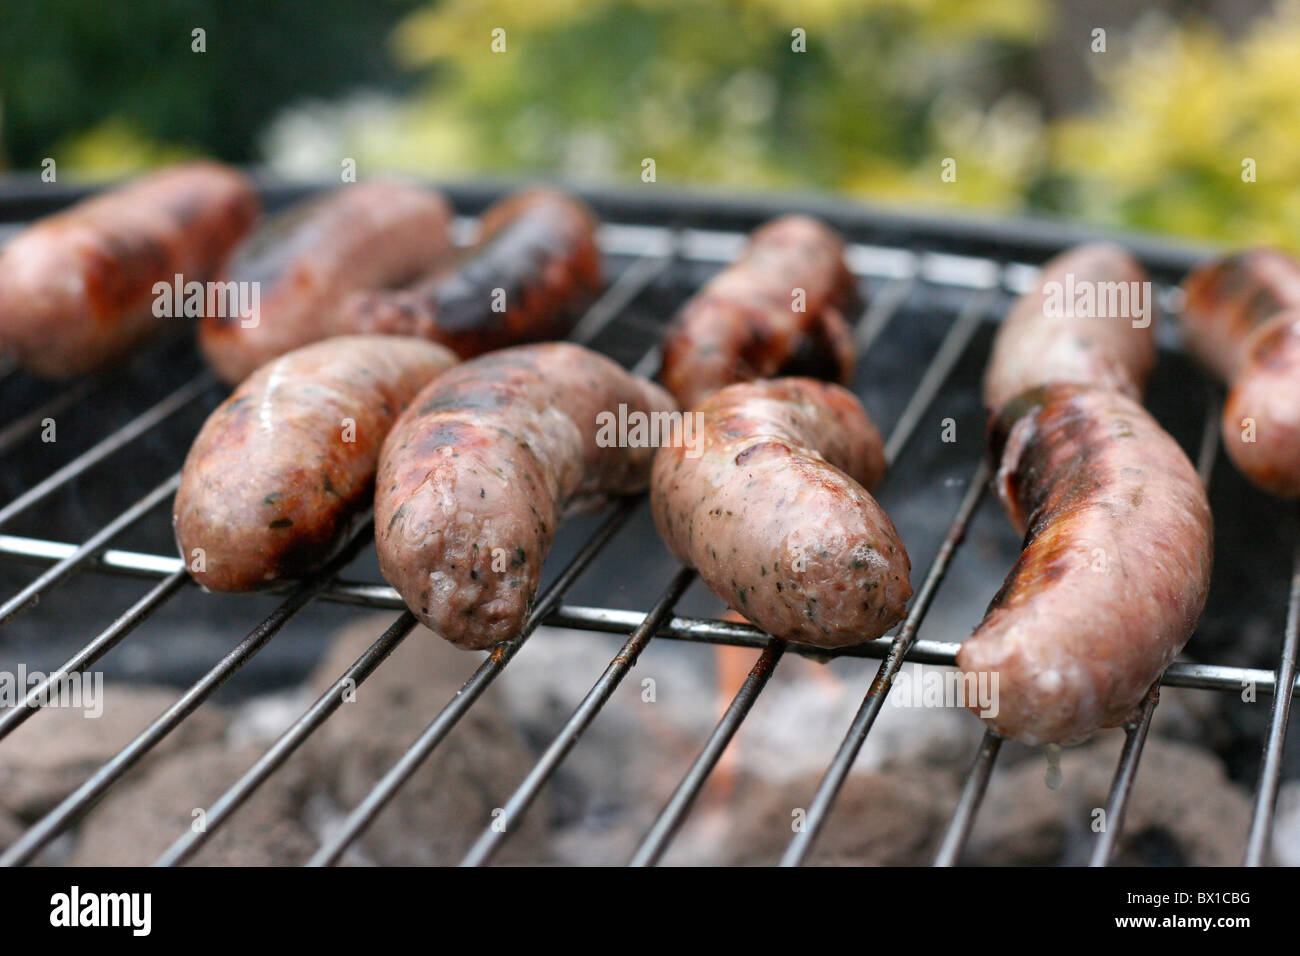 Sausages on the Barbecue in the garden Stock Photo